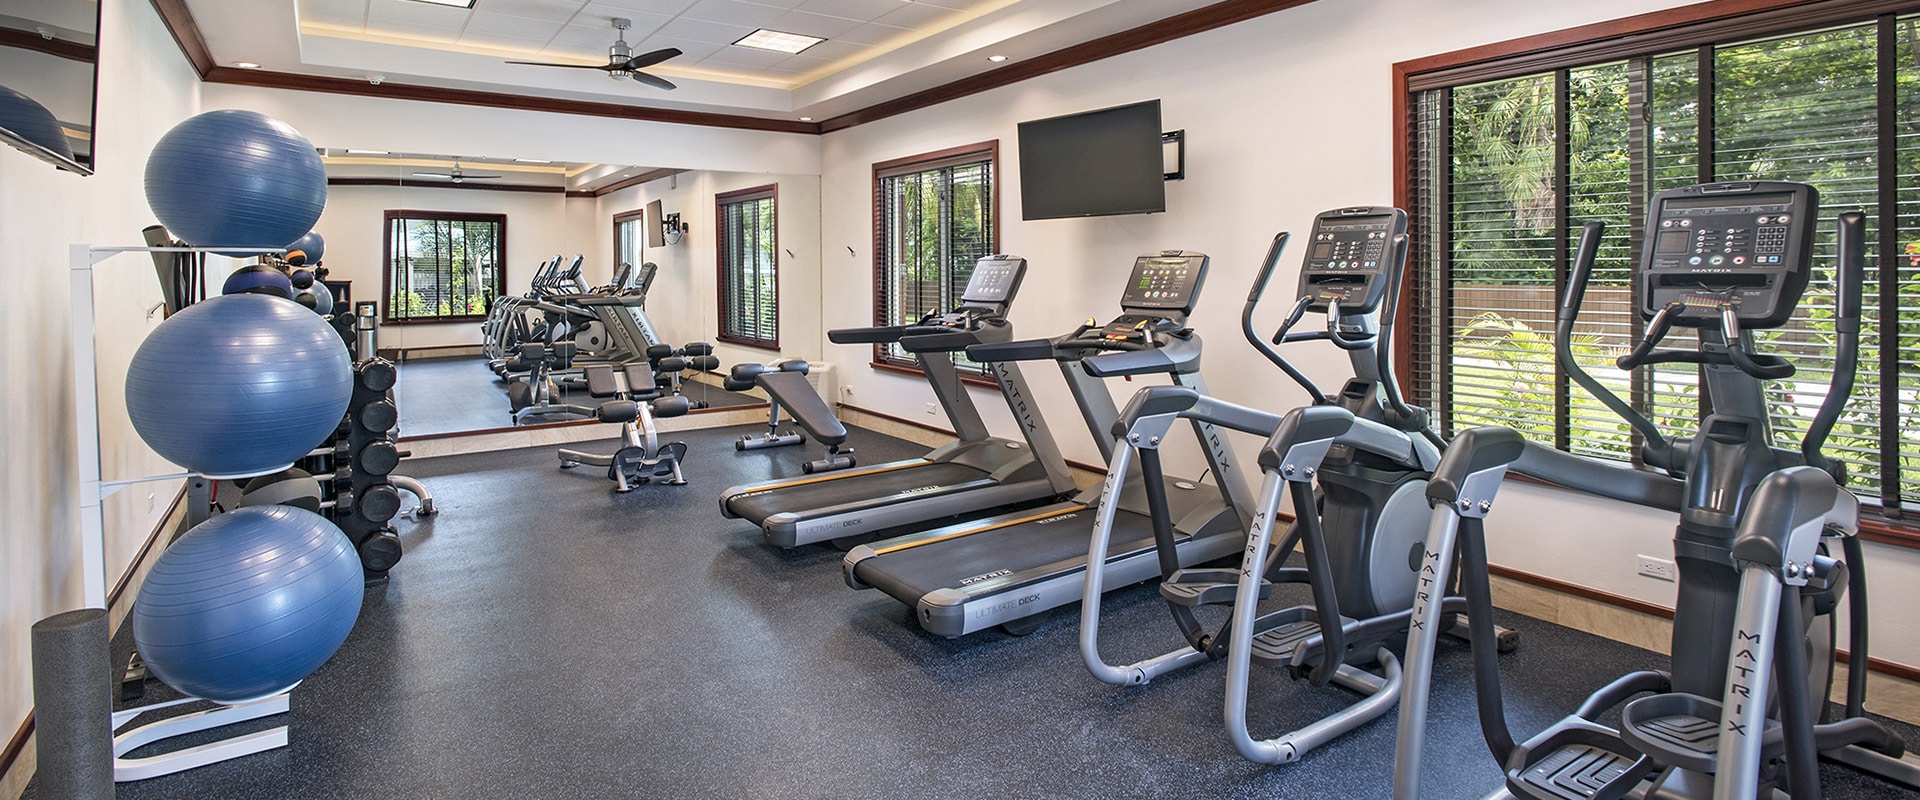 Fitness centre at Victoria House Resort and Spa, Belize